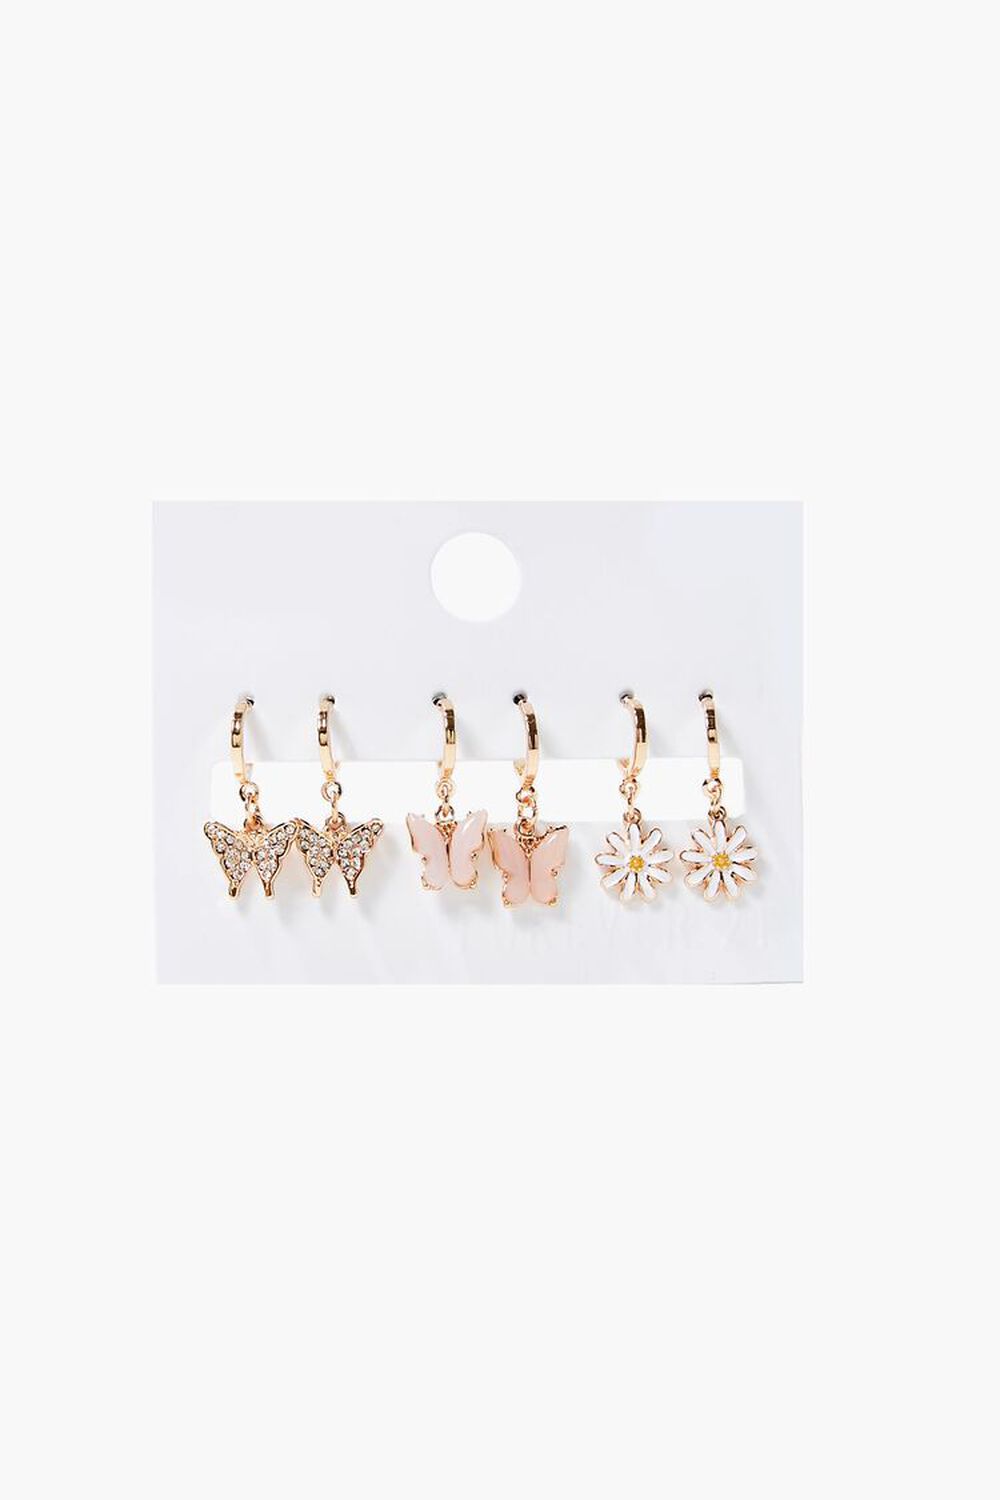 GOLD/PINK Butterfly & Daisy Charm Hoop Earring Set, image 1